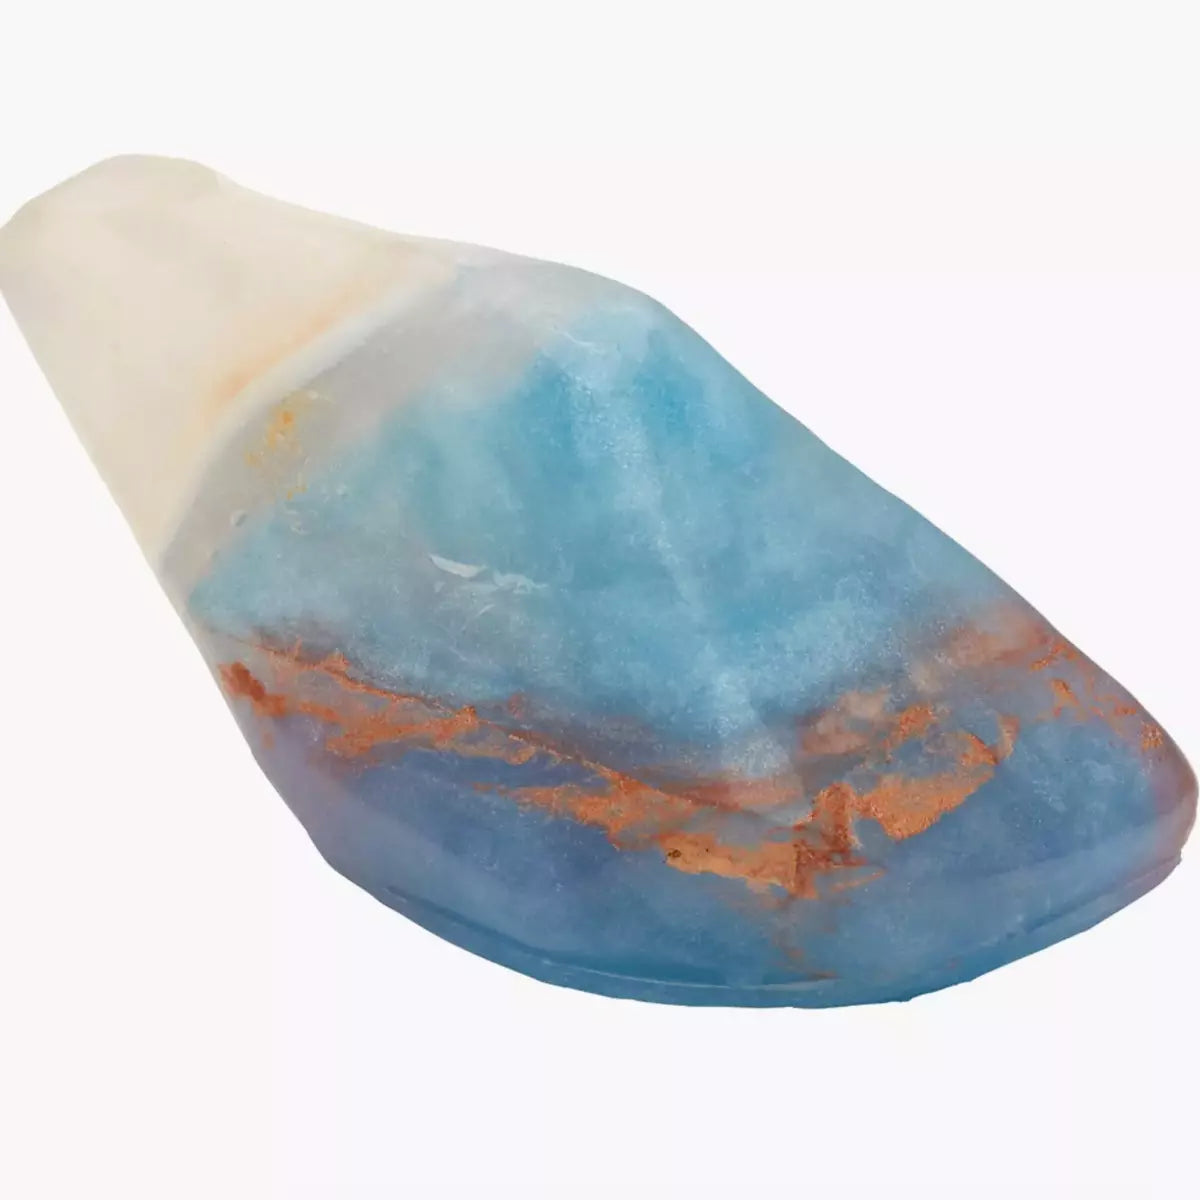 A piece of blue and orange Crystal Soap - OPAL - Coconut + Vanilla by Summer Salt Body on a white background, perfect for skincare or Crystal Soap lovers.